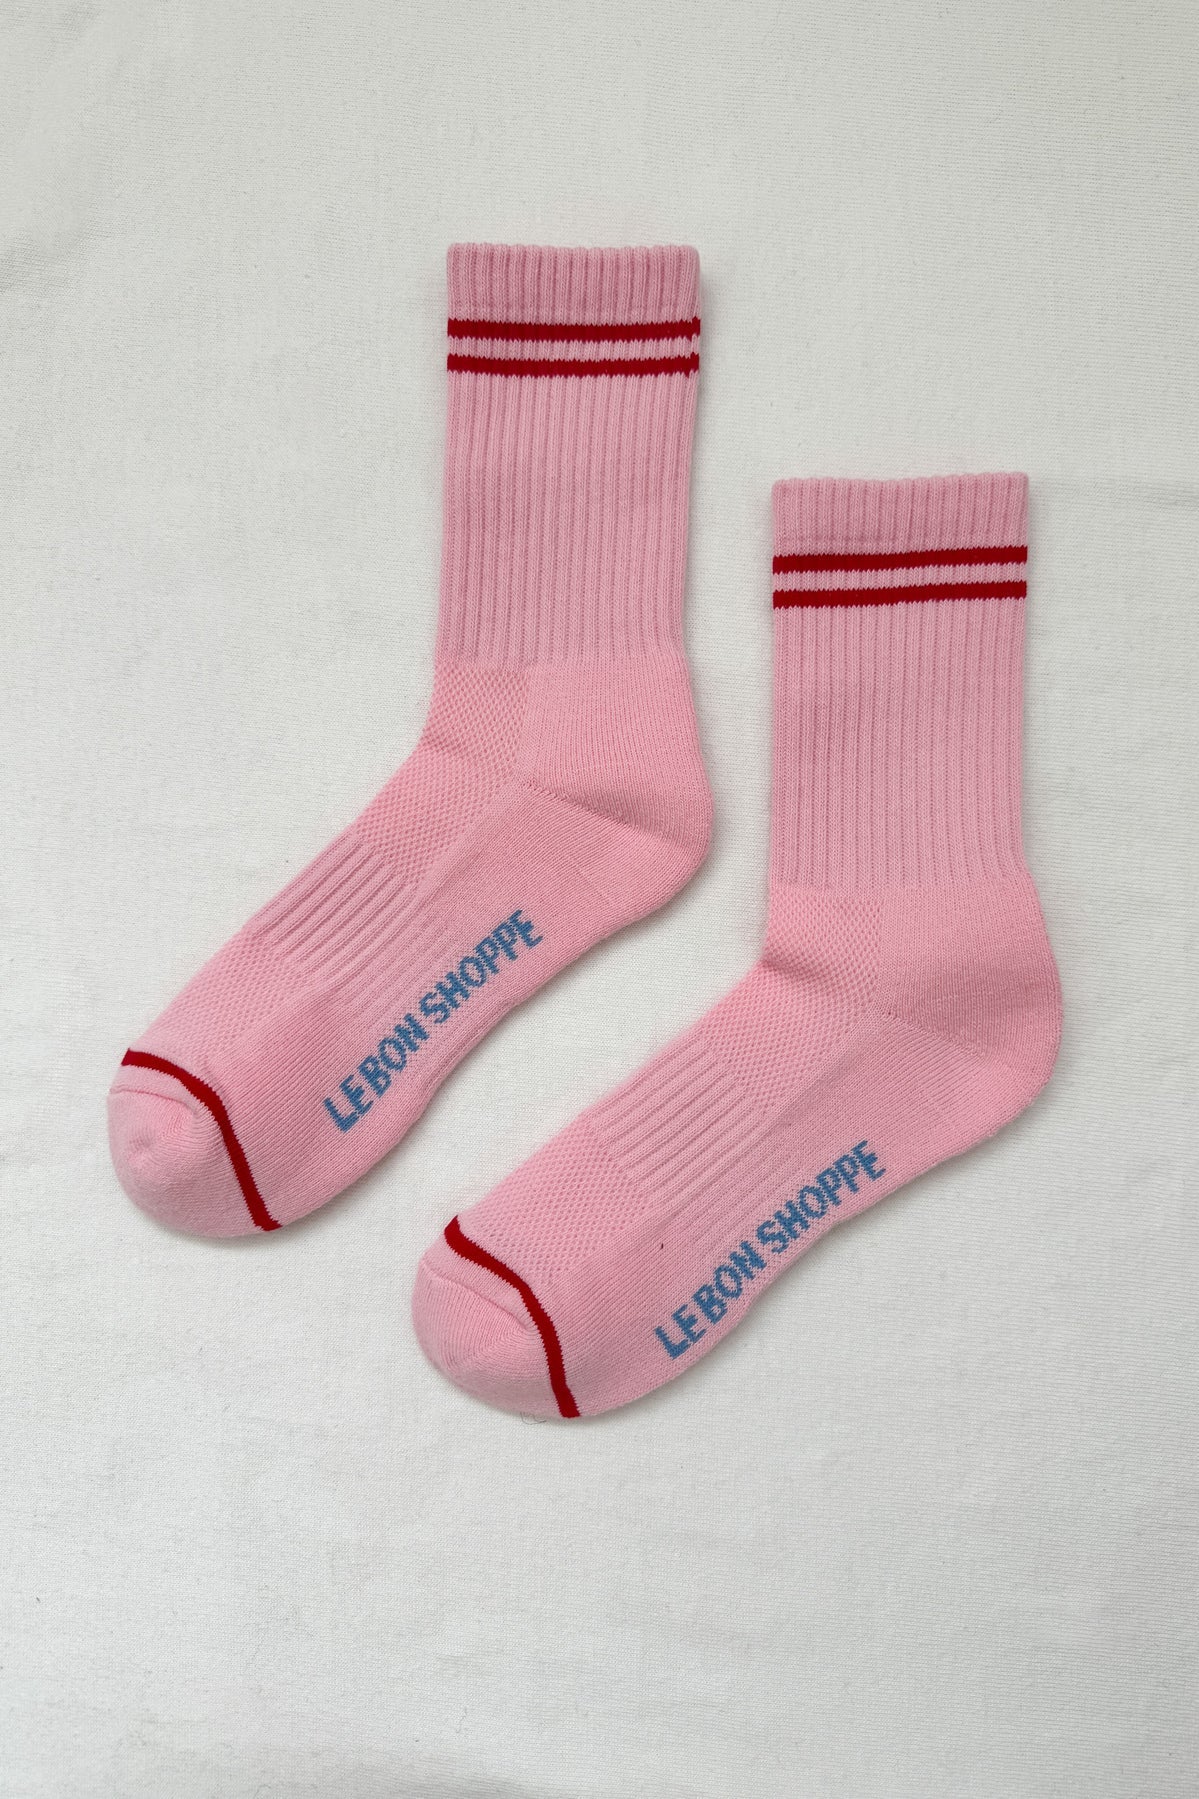 Le Bon Shoppe Boyfriend socks amour pink red stripes | Pipe and Row Boutique Seattle